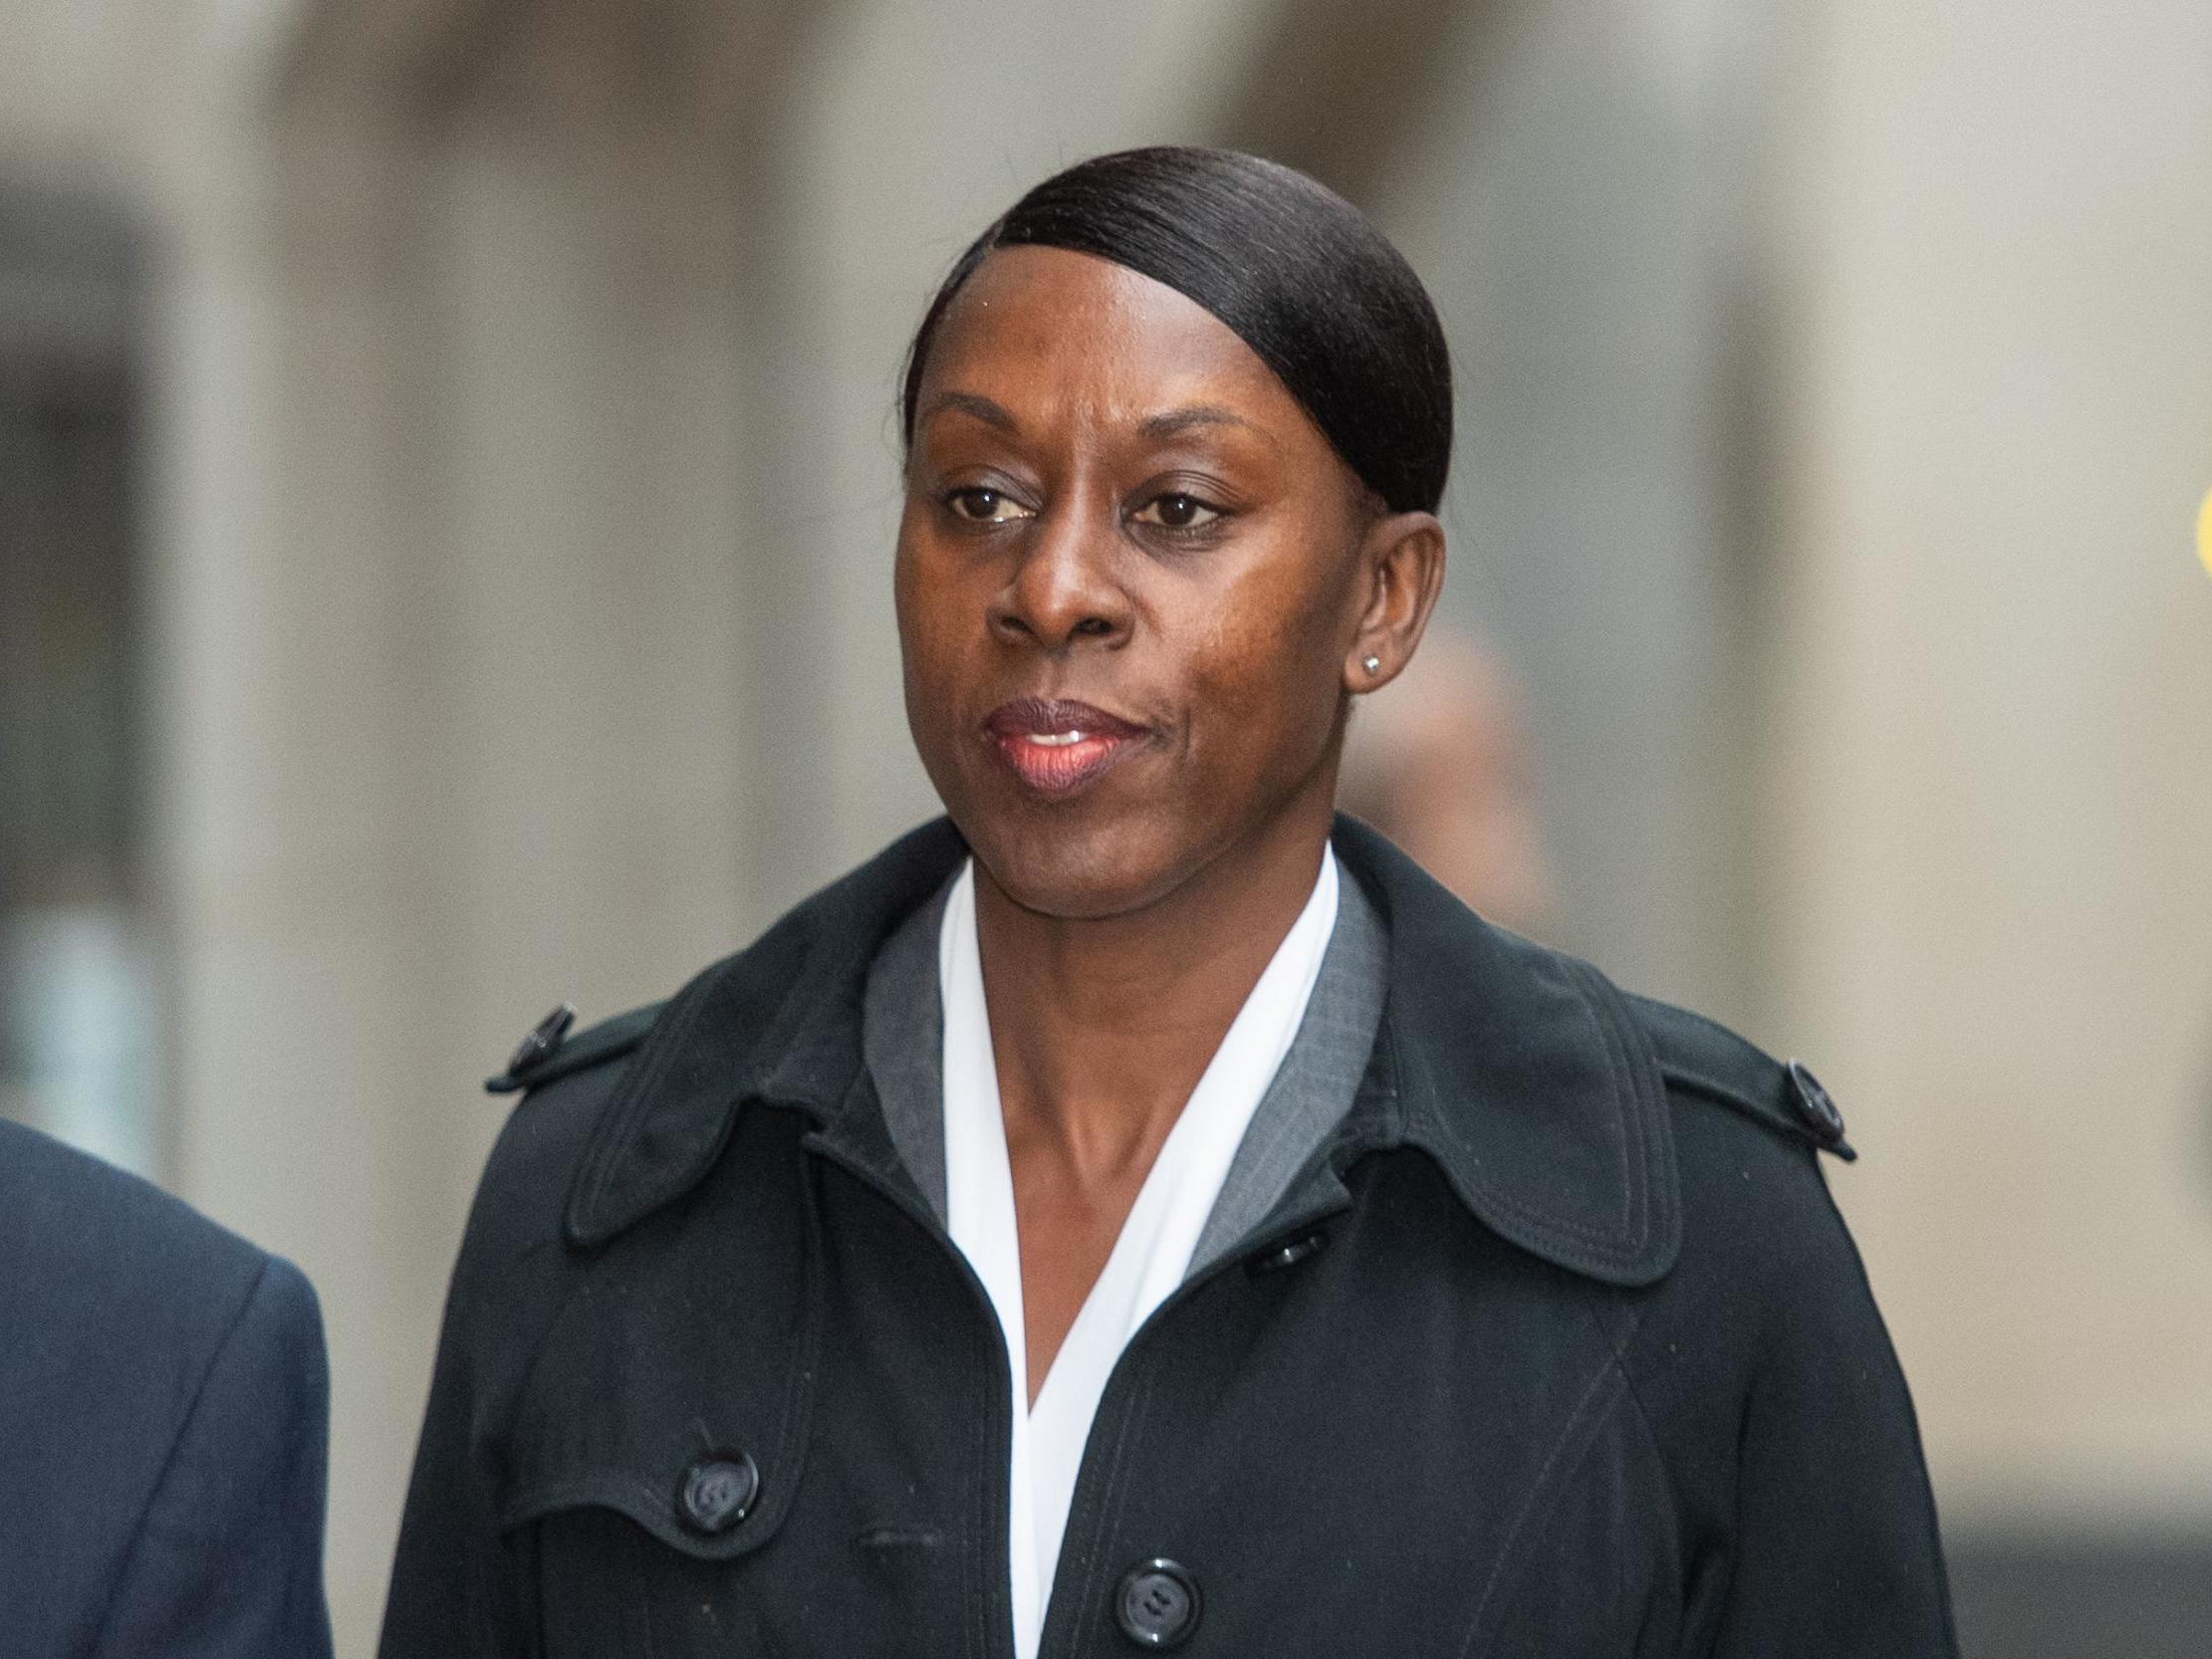 Senior Met Police Officer Charged With Breaking Sex Offence Notification Requirements The 2755